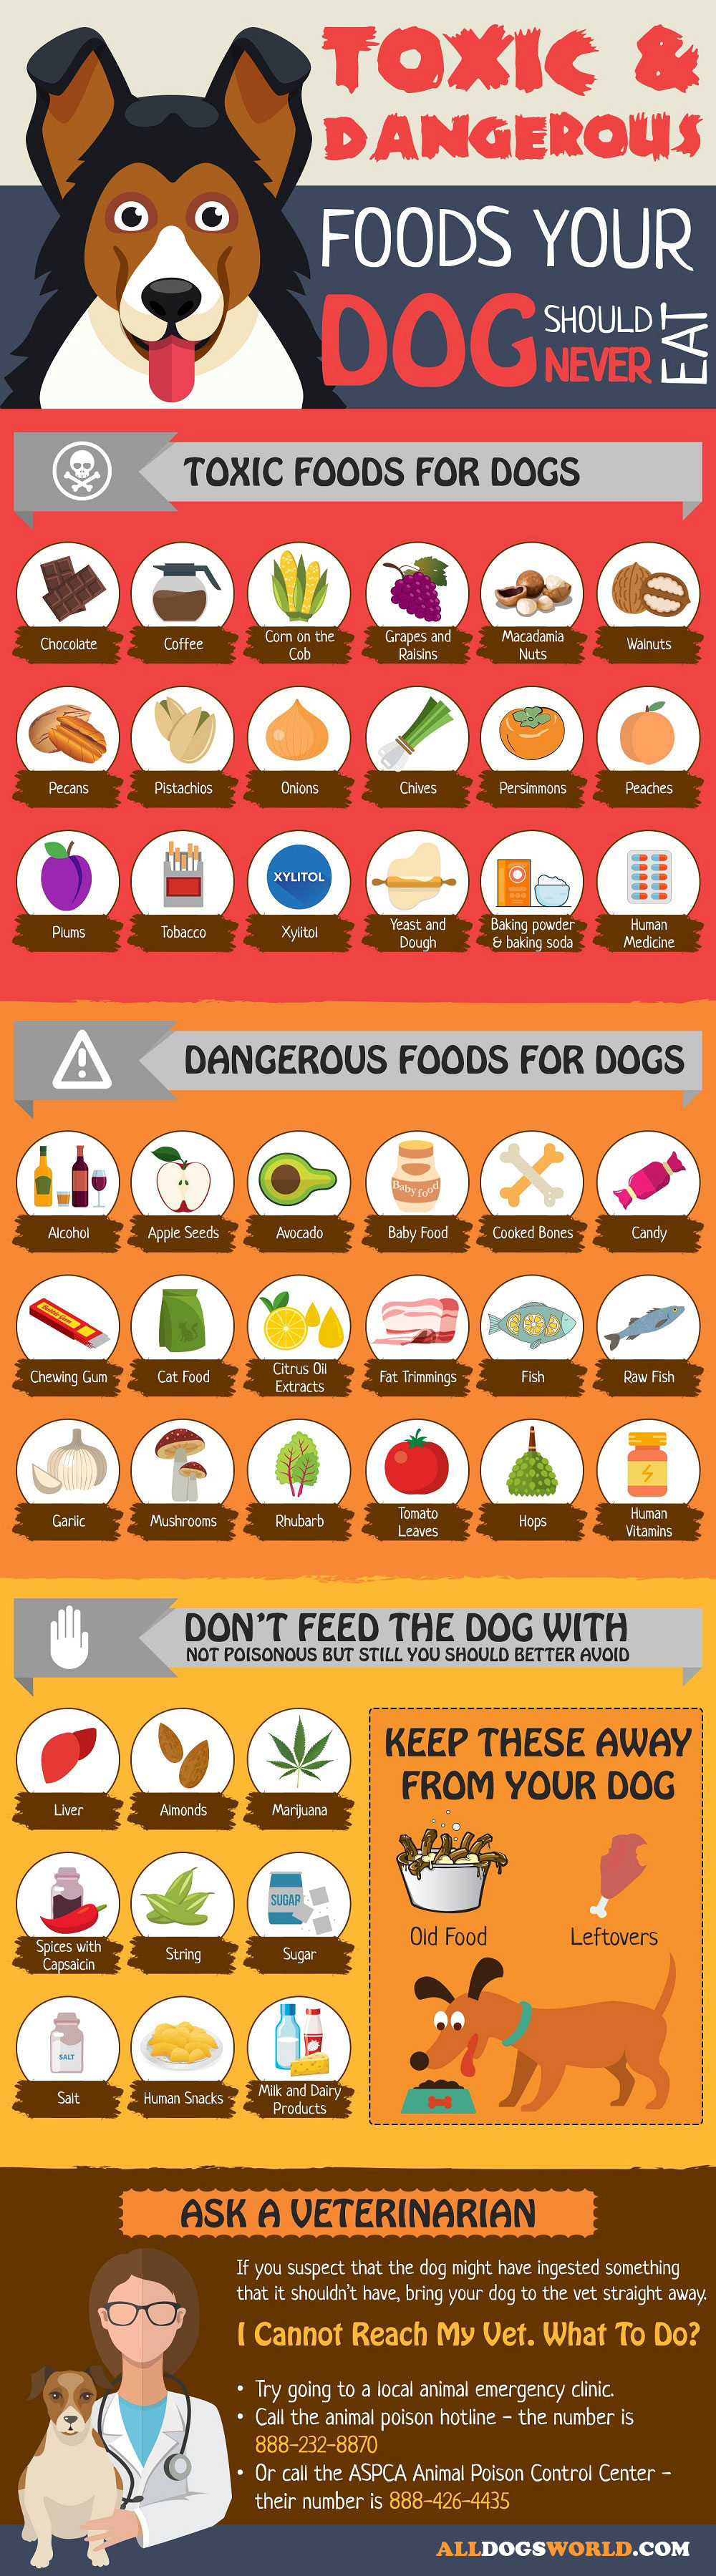 Toxic Foods for Dogs - Infographic